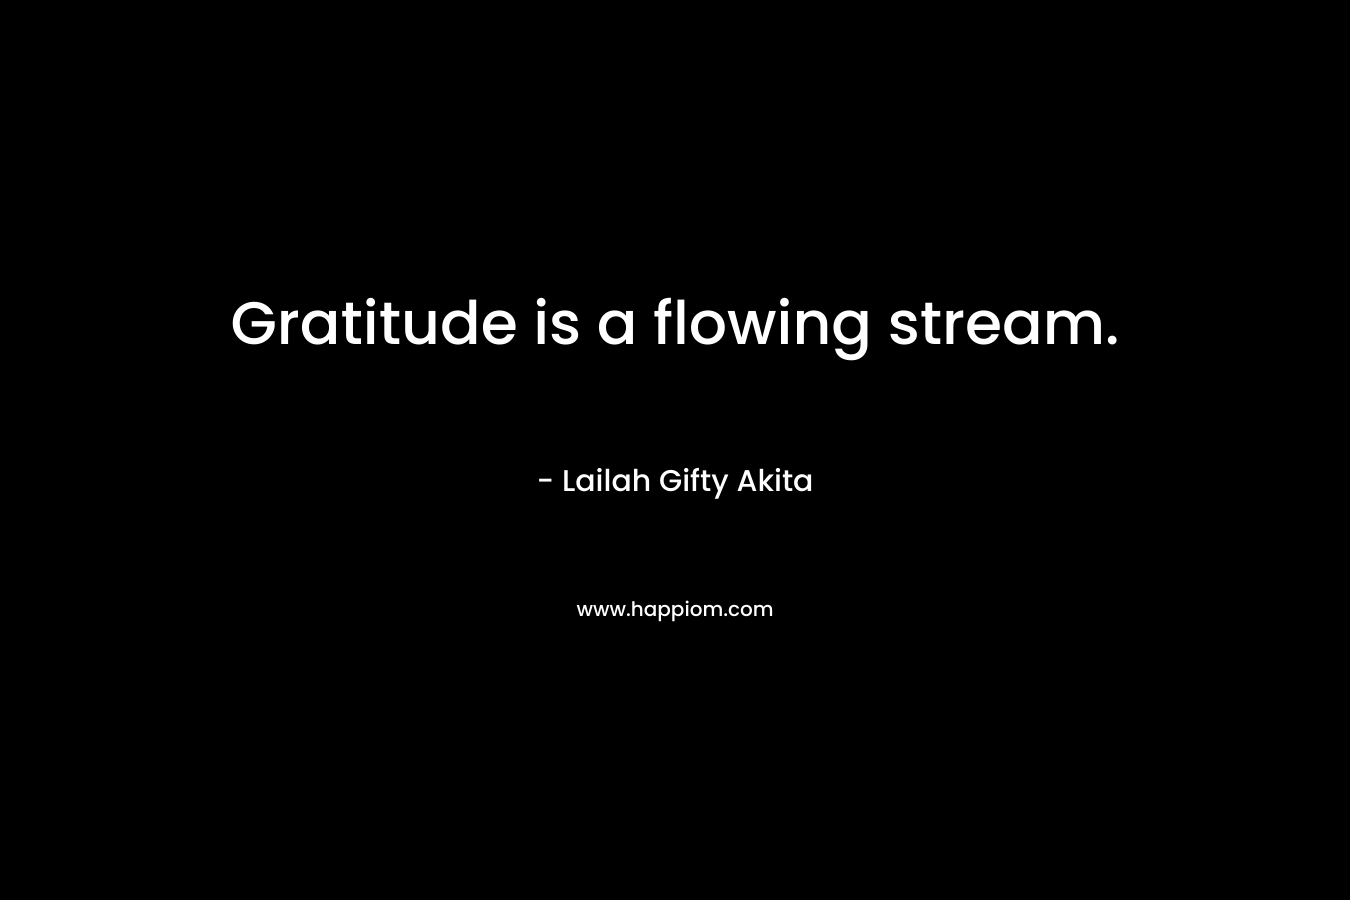 Gratitude is a flowing stream.